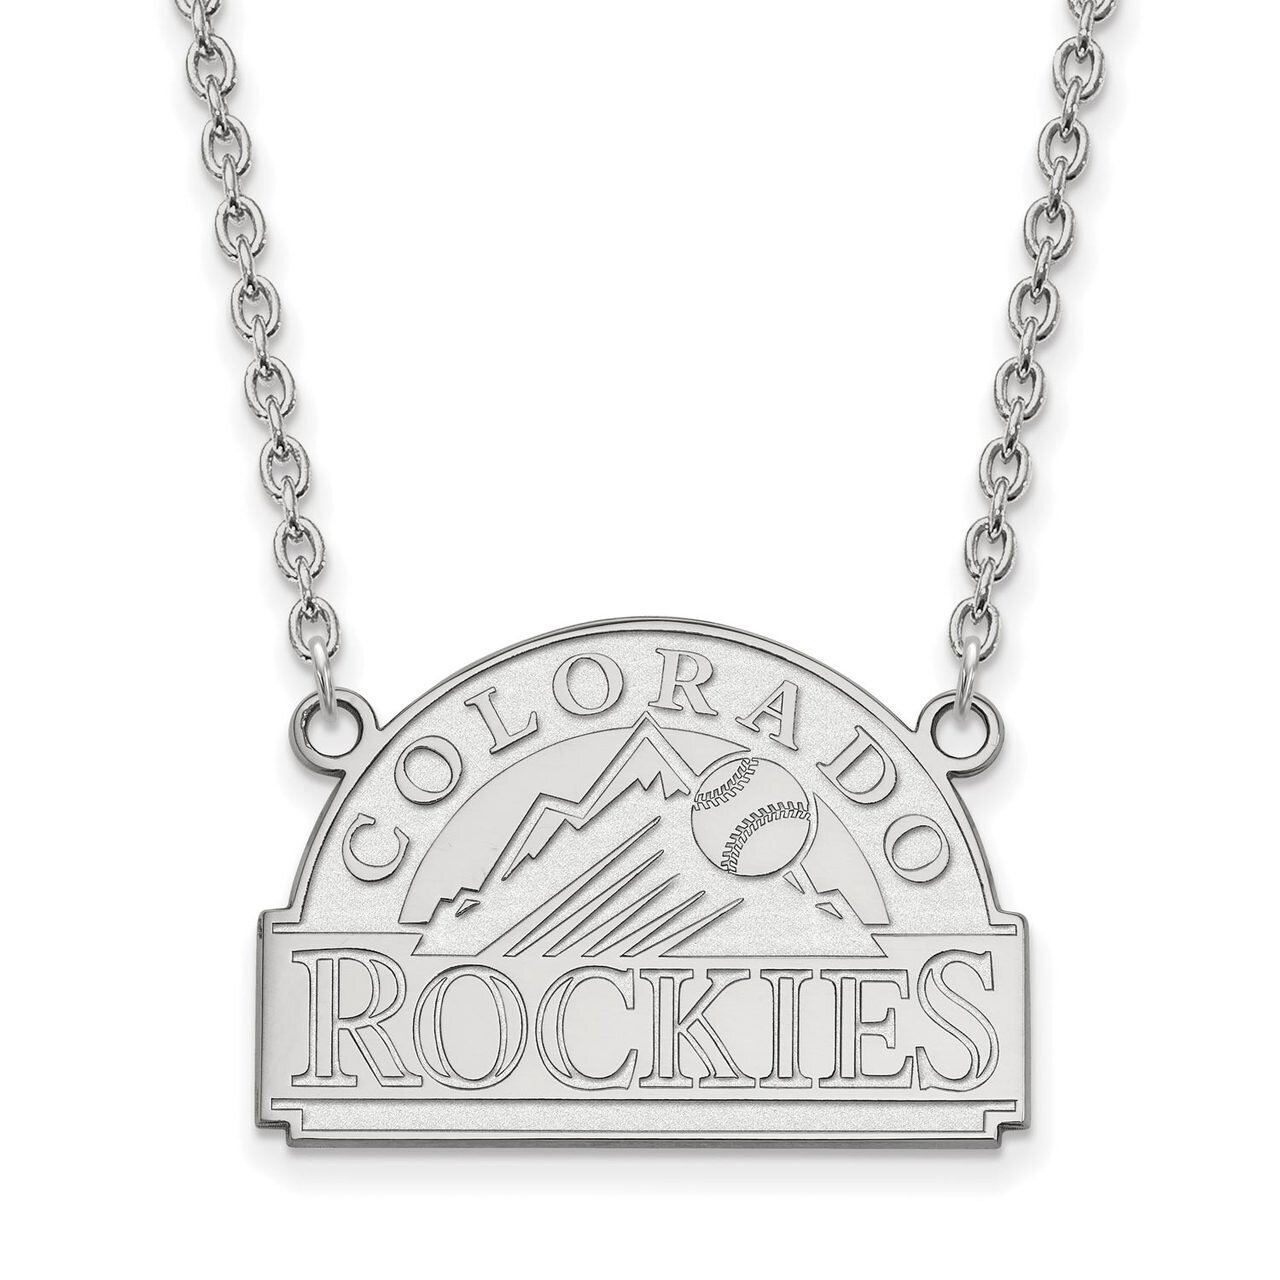 Colorado Rockies Large Pendant with Chain Necklace 10k White Gold 1W007ROK-18